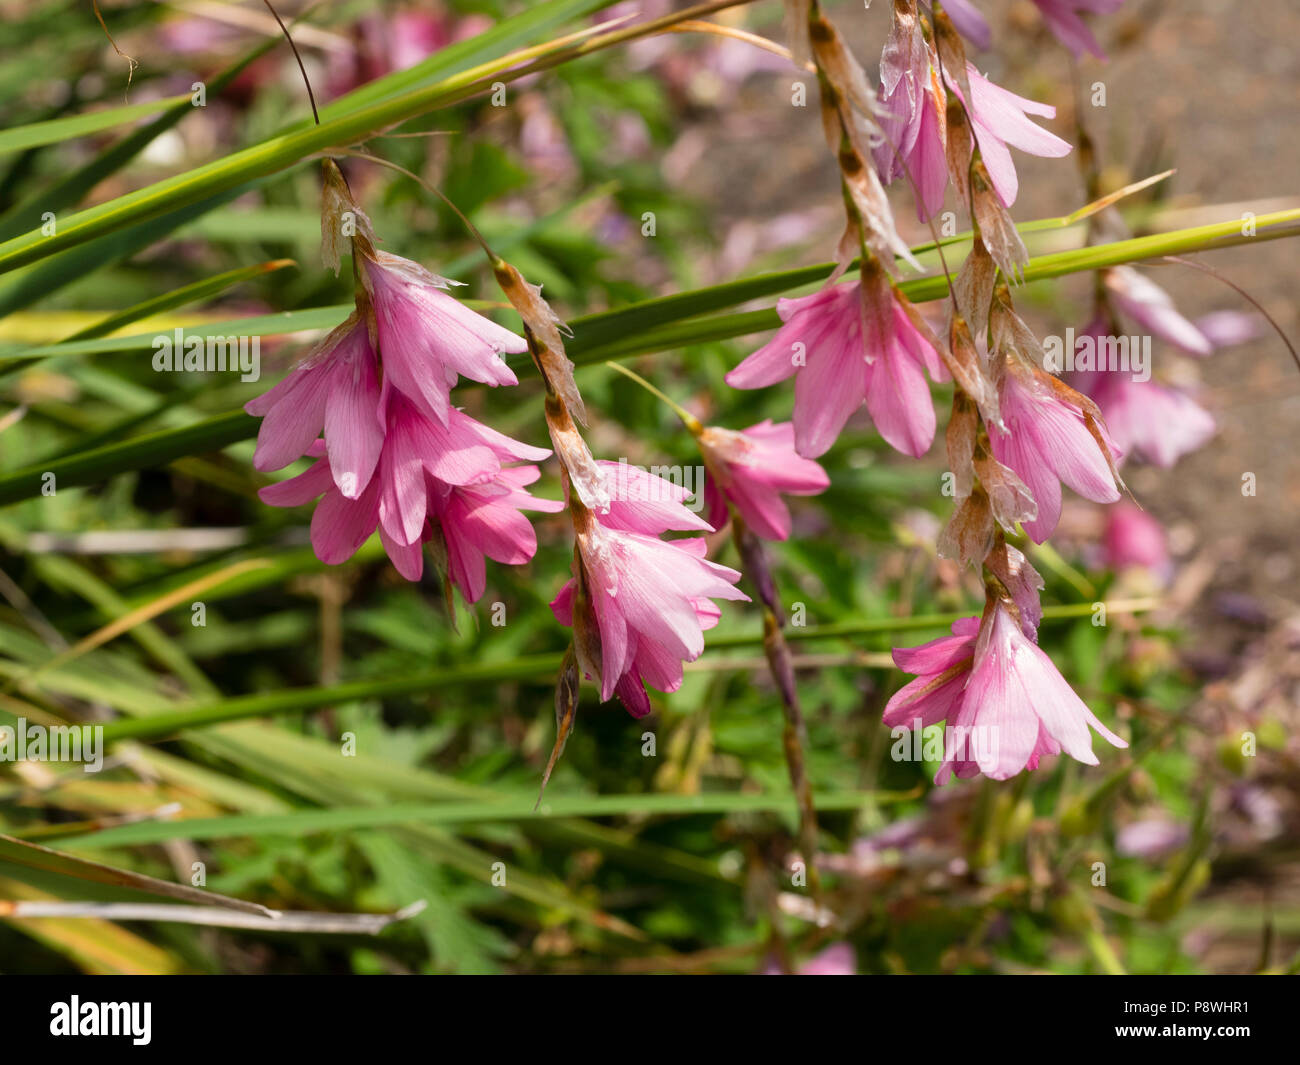 Dangling pink flowers of the hardy angel's fishing rod, Dierama 'Pink Ballerina' Stock Photo